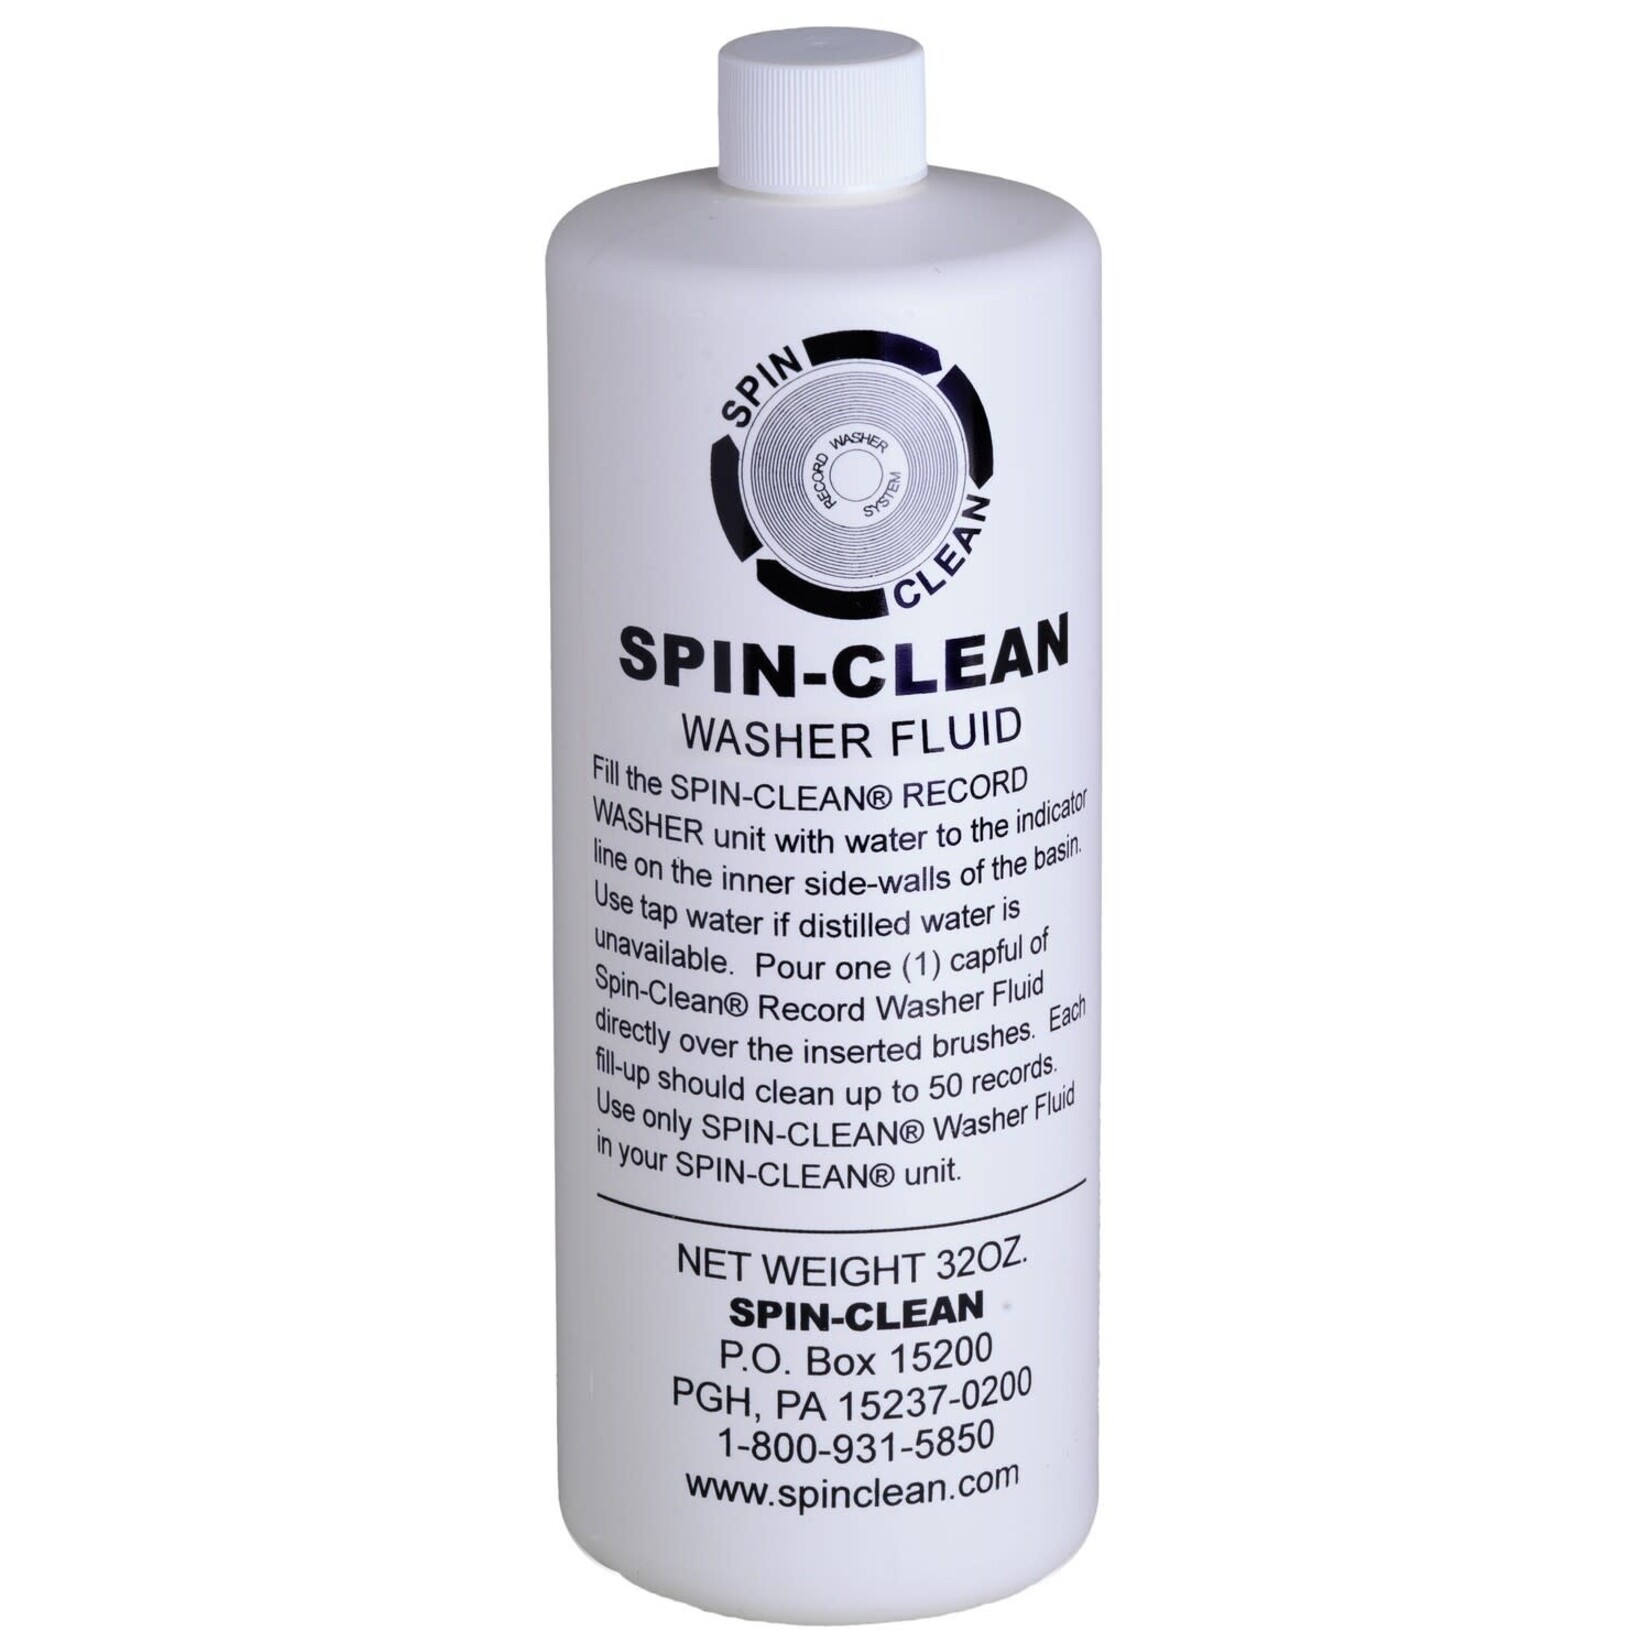 Spin-Clean - Washer Fluid: 32 Oz